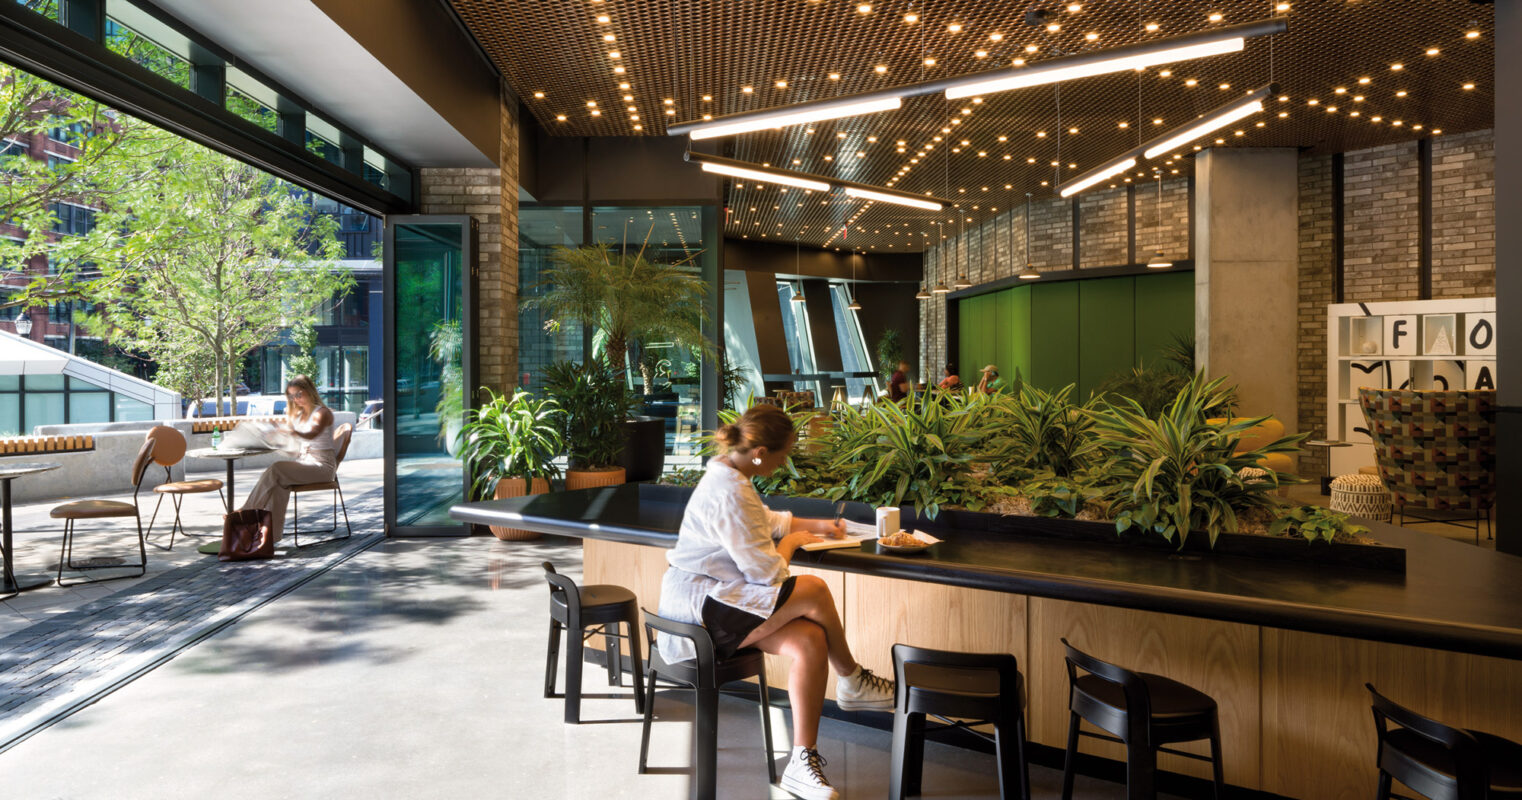 A spacious and modern cafe interior with natural lighting, featuring high ceilings with stylish hanging lights, green plant accents, and patrons enjoying a relaxed atmosphere at individual tables.